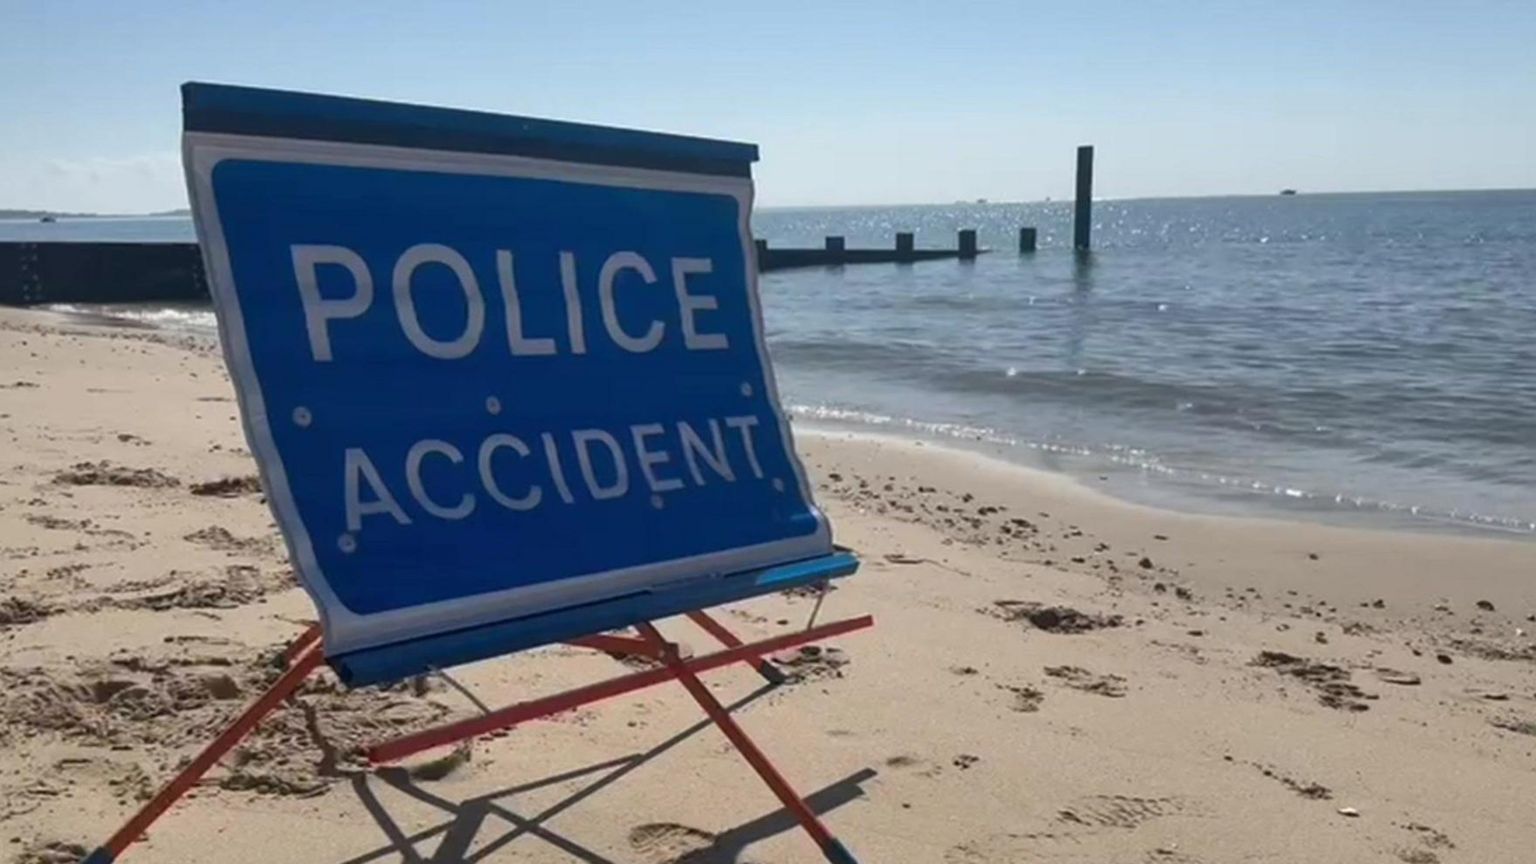 Police accident sign at Durley Chine Beach